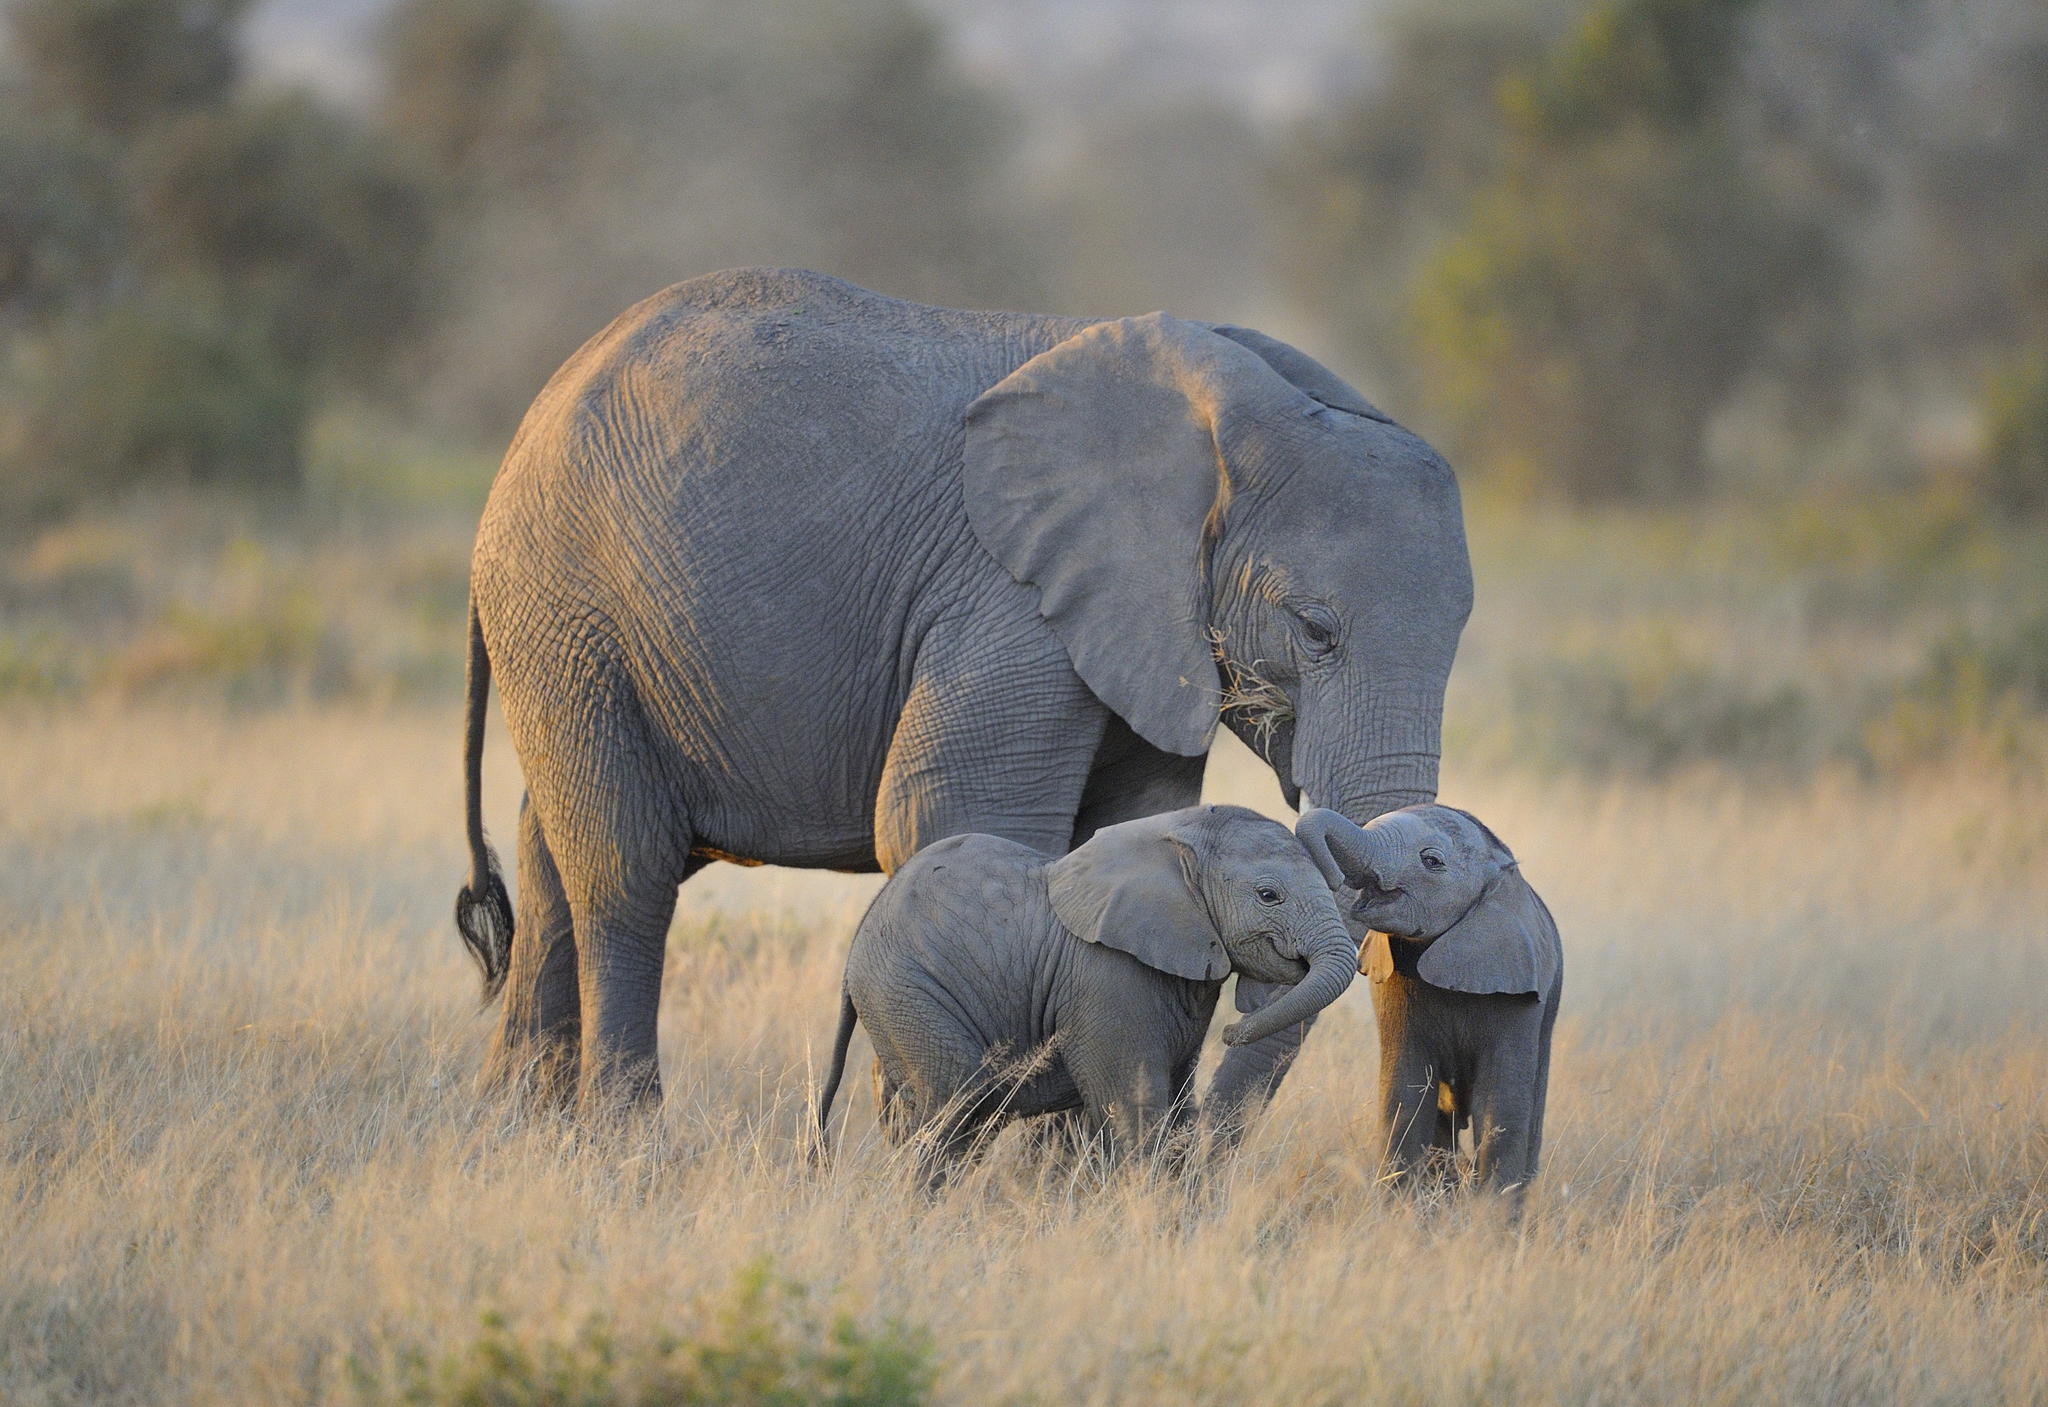 30+ Cute & Funny Baby Elephant Images That Will Brighten Up Your Day